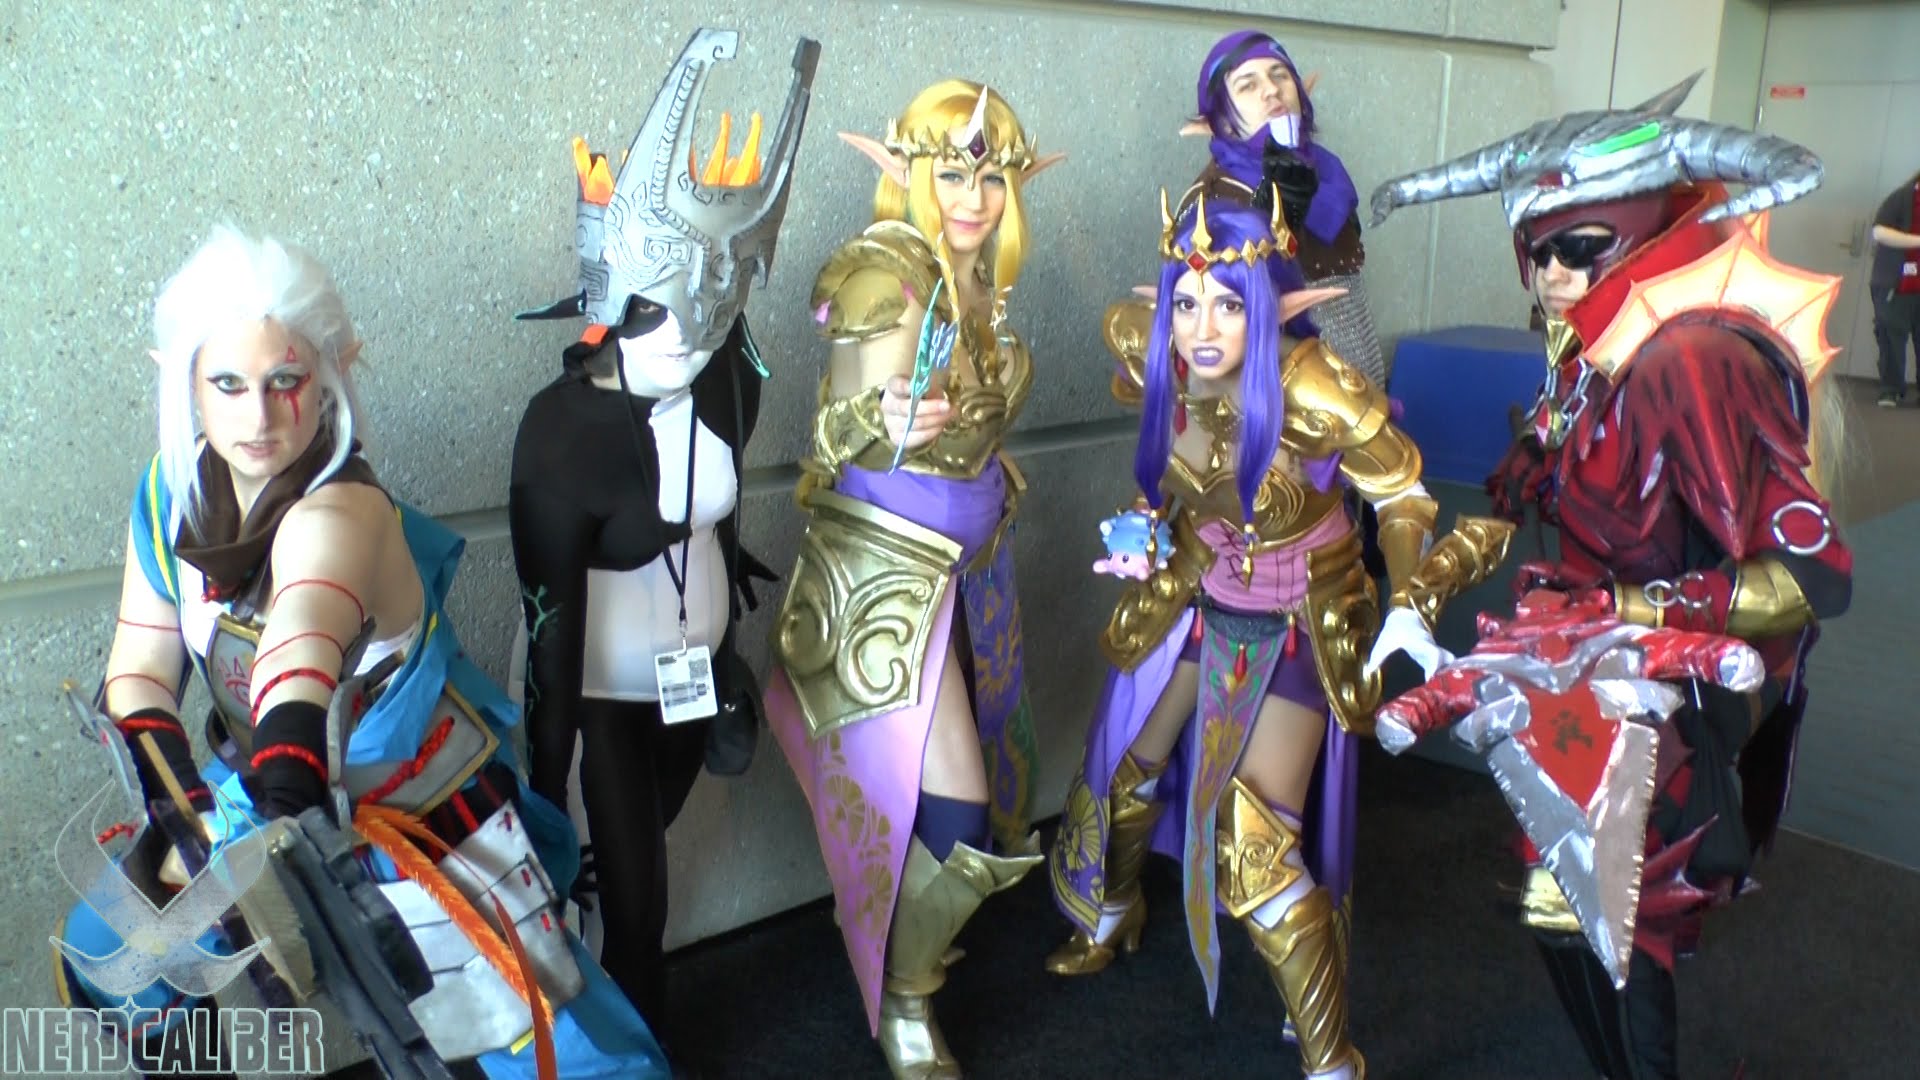 Epic HYRULE WARRIORS Group Cosplay! - YouTube